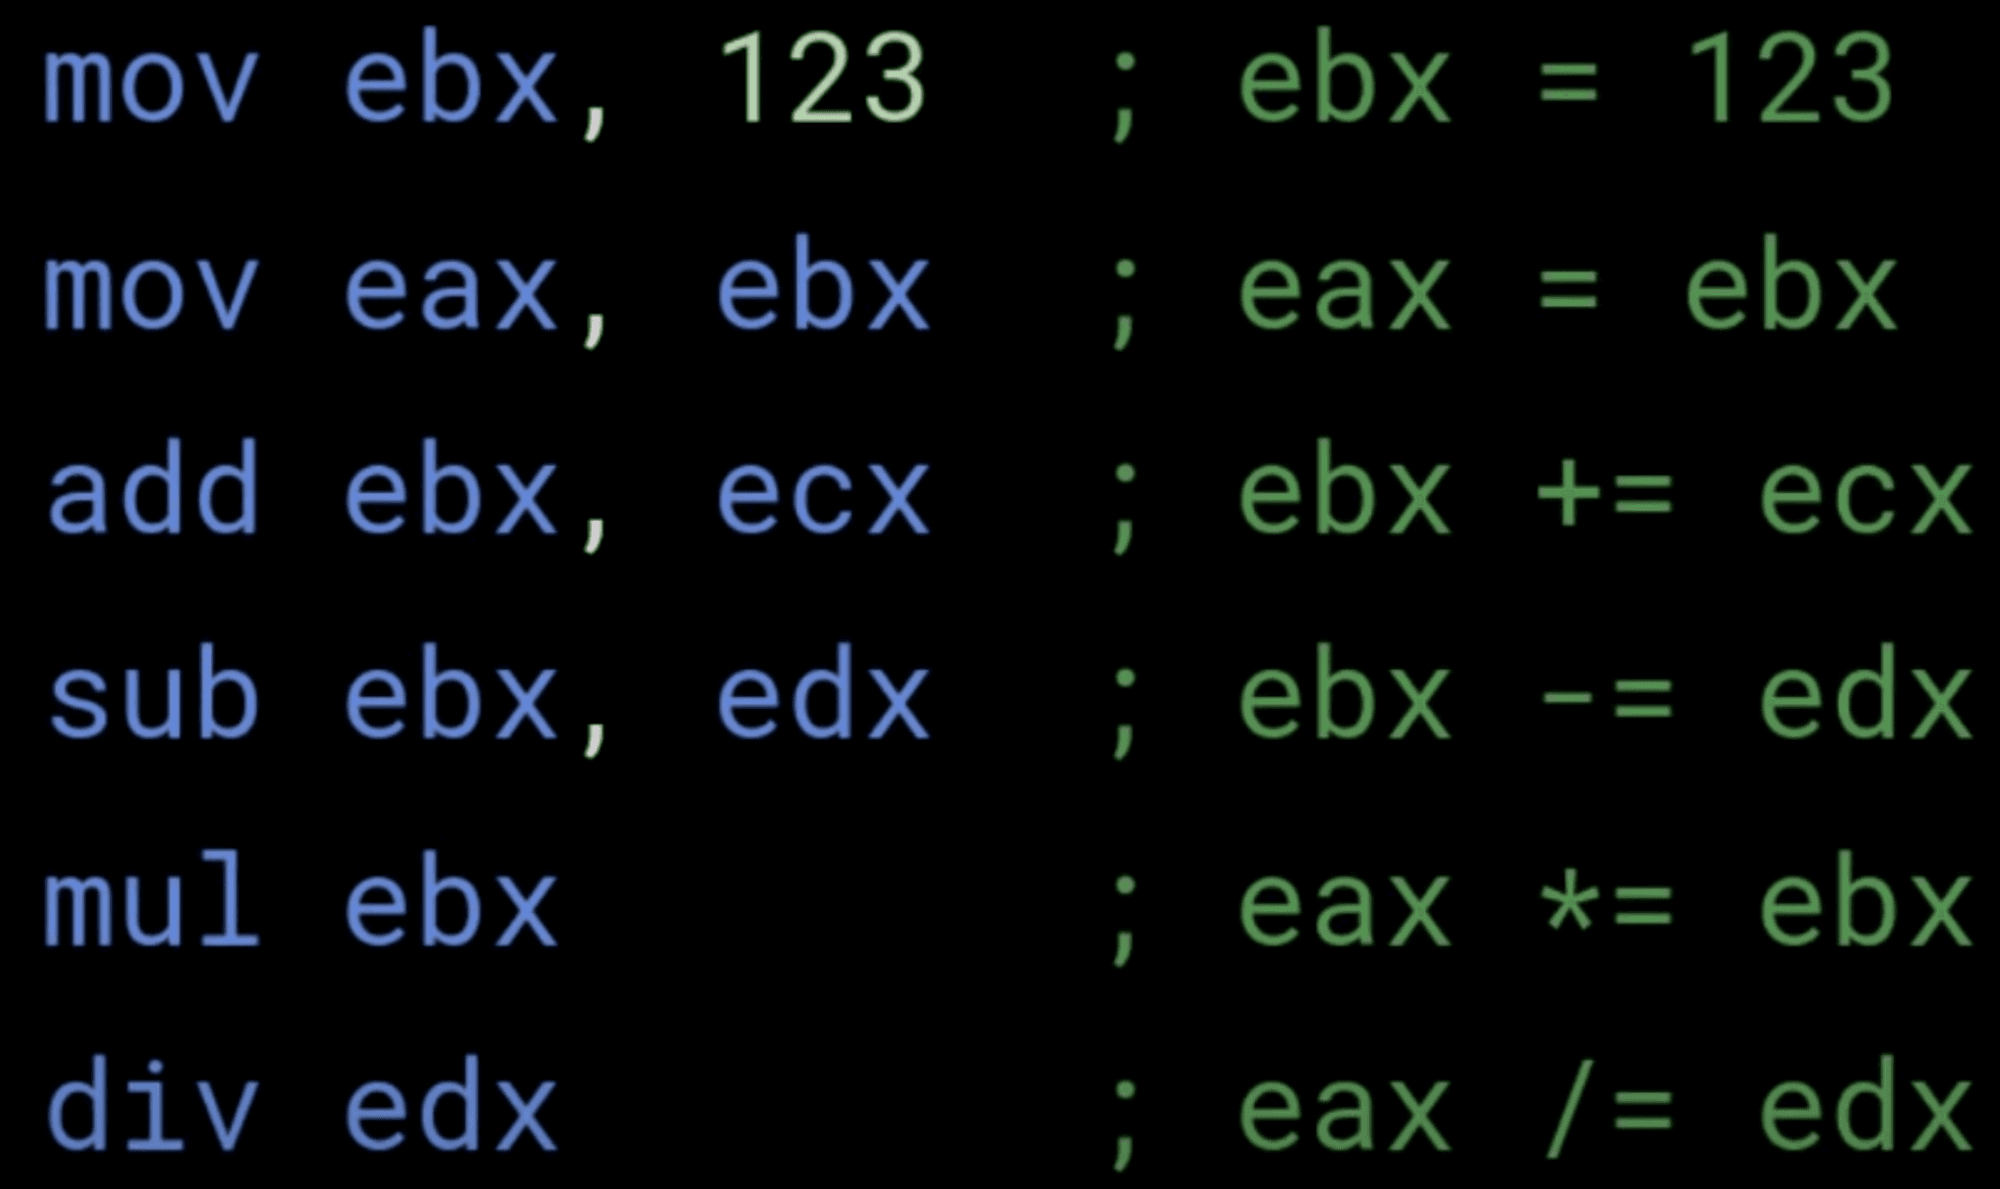 More examples showing the typical syntax in asm